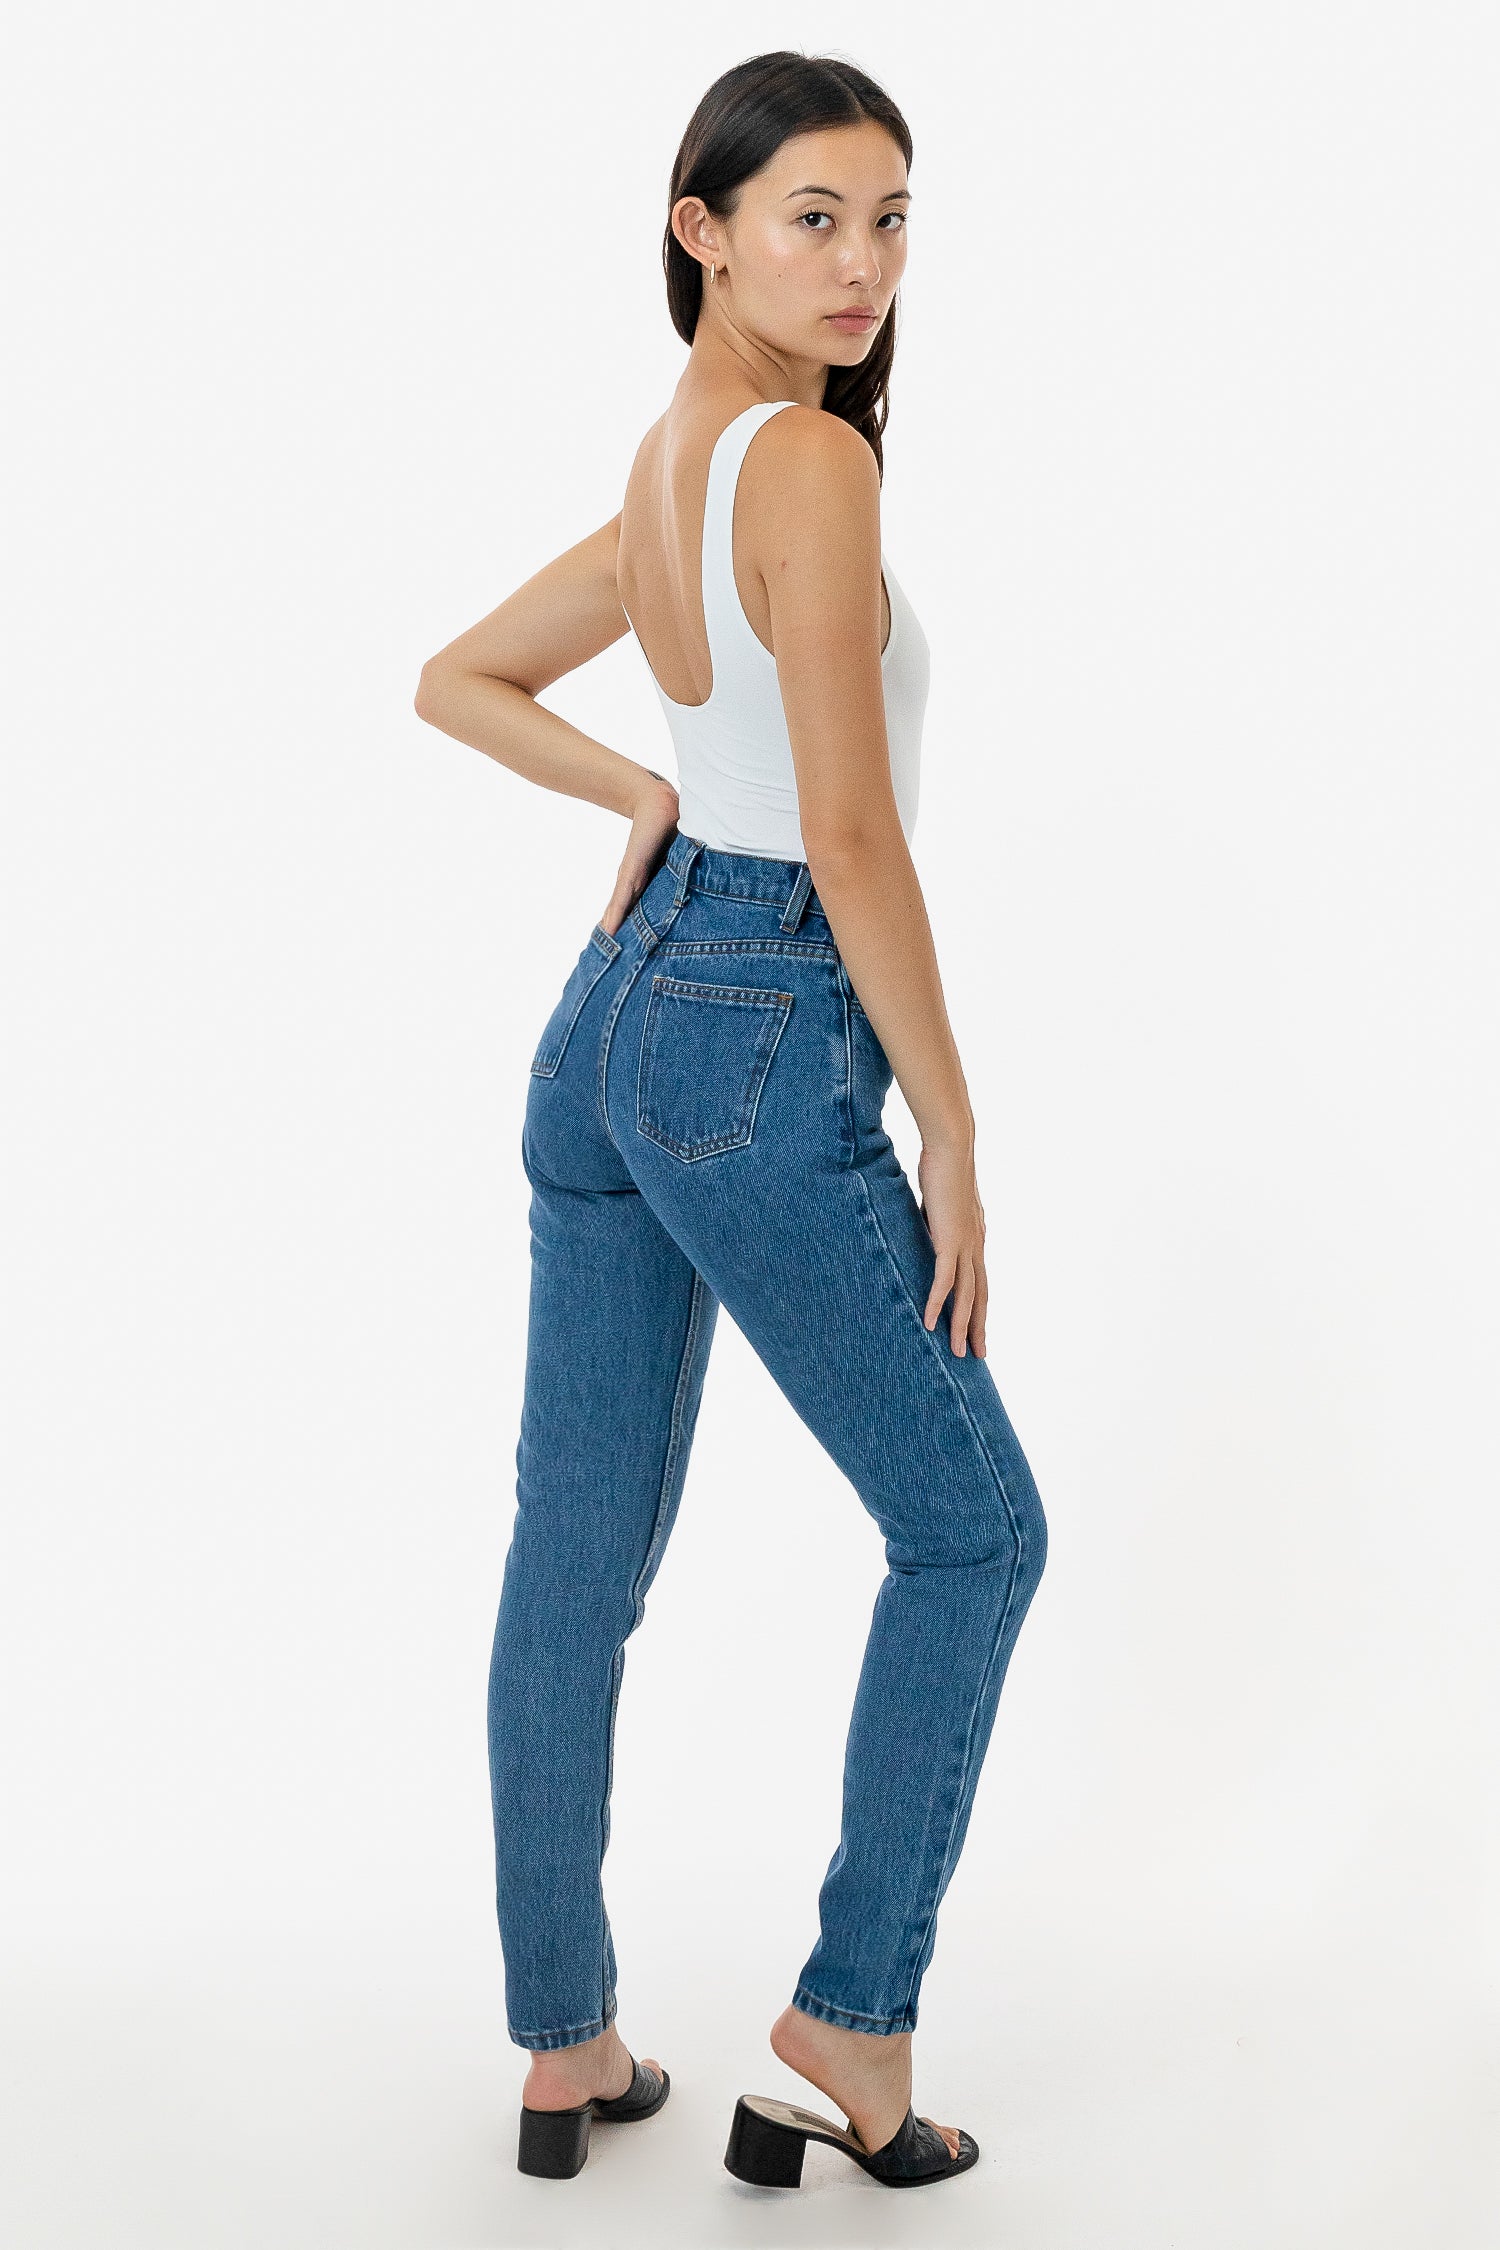 RDNW701 - High Waisted Tapered Jean